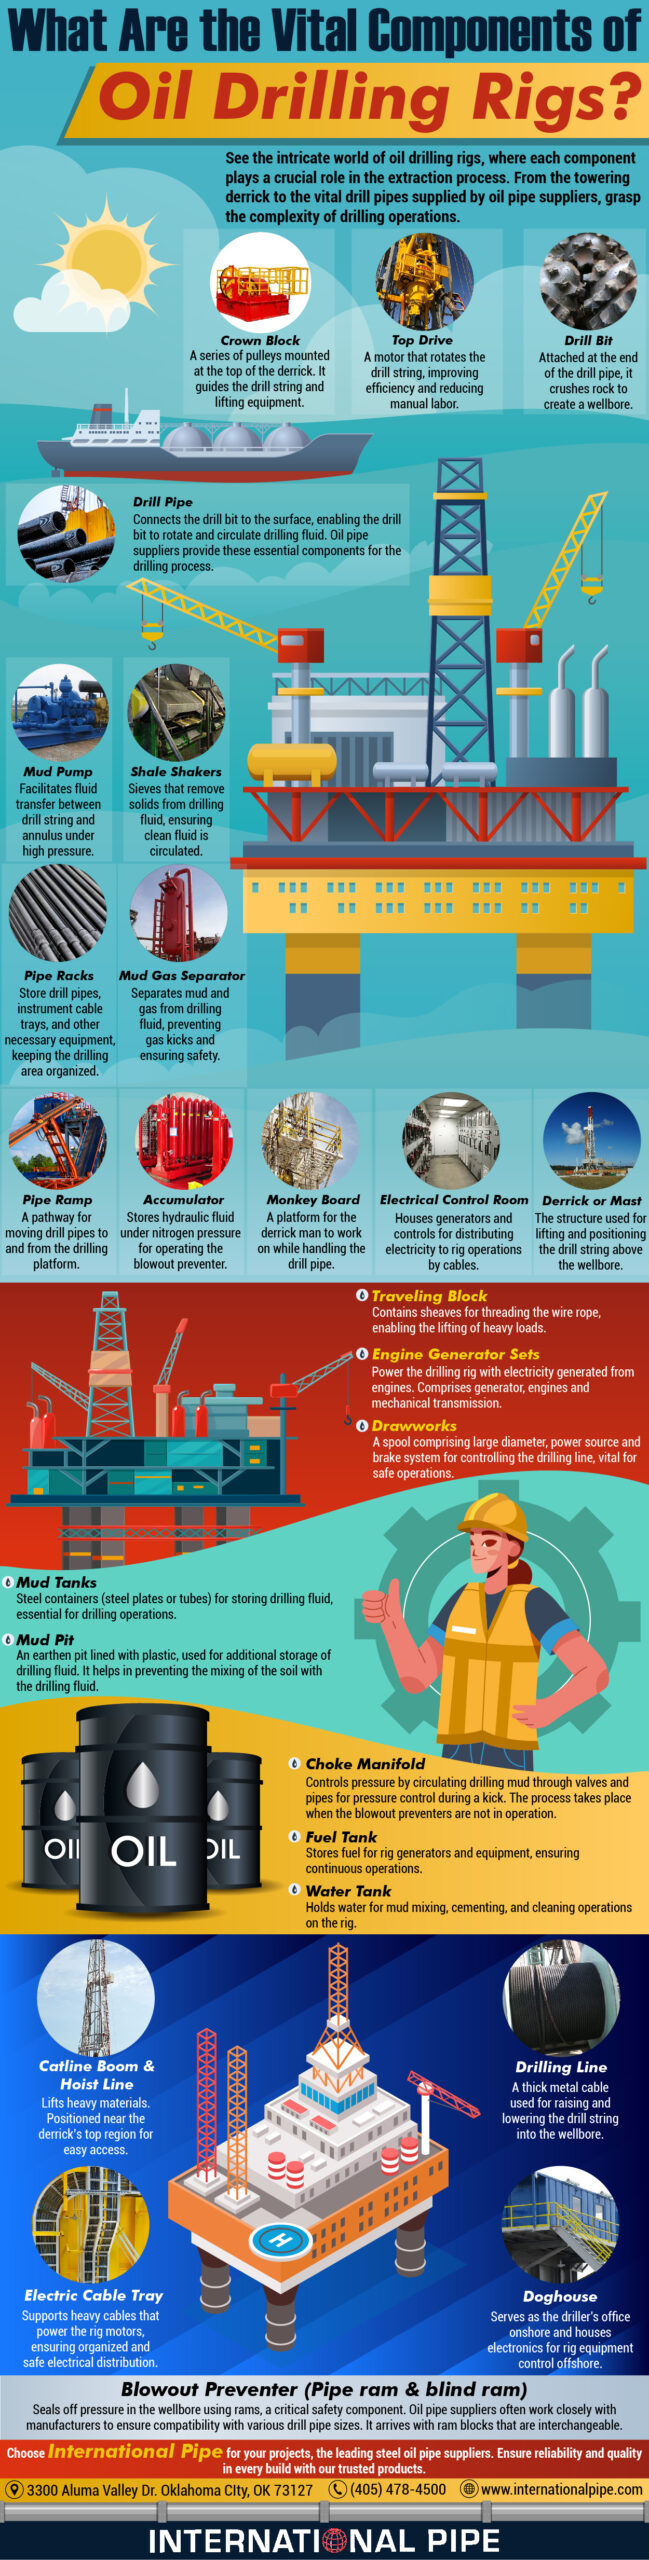 What Are The Vital Components Of Oil Drilling Rigs